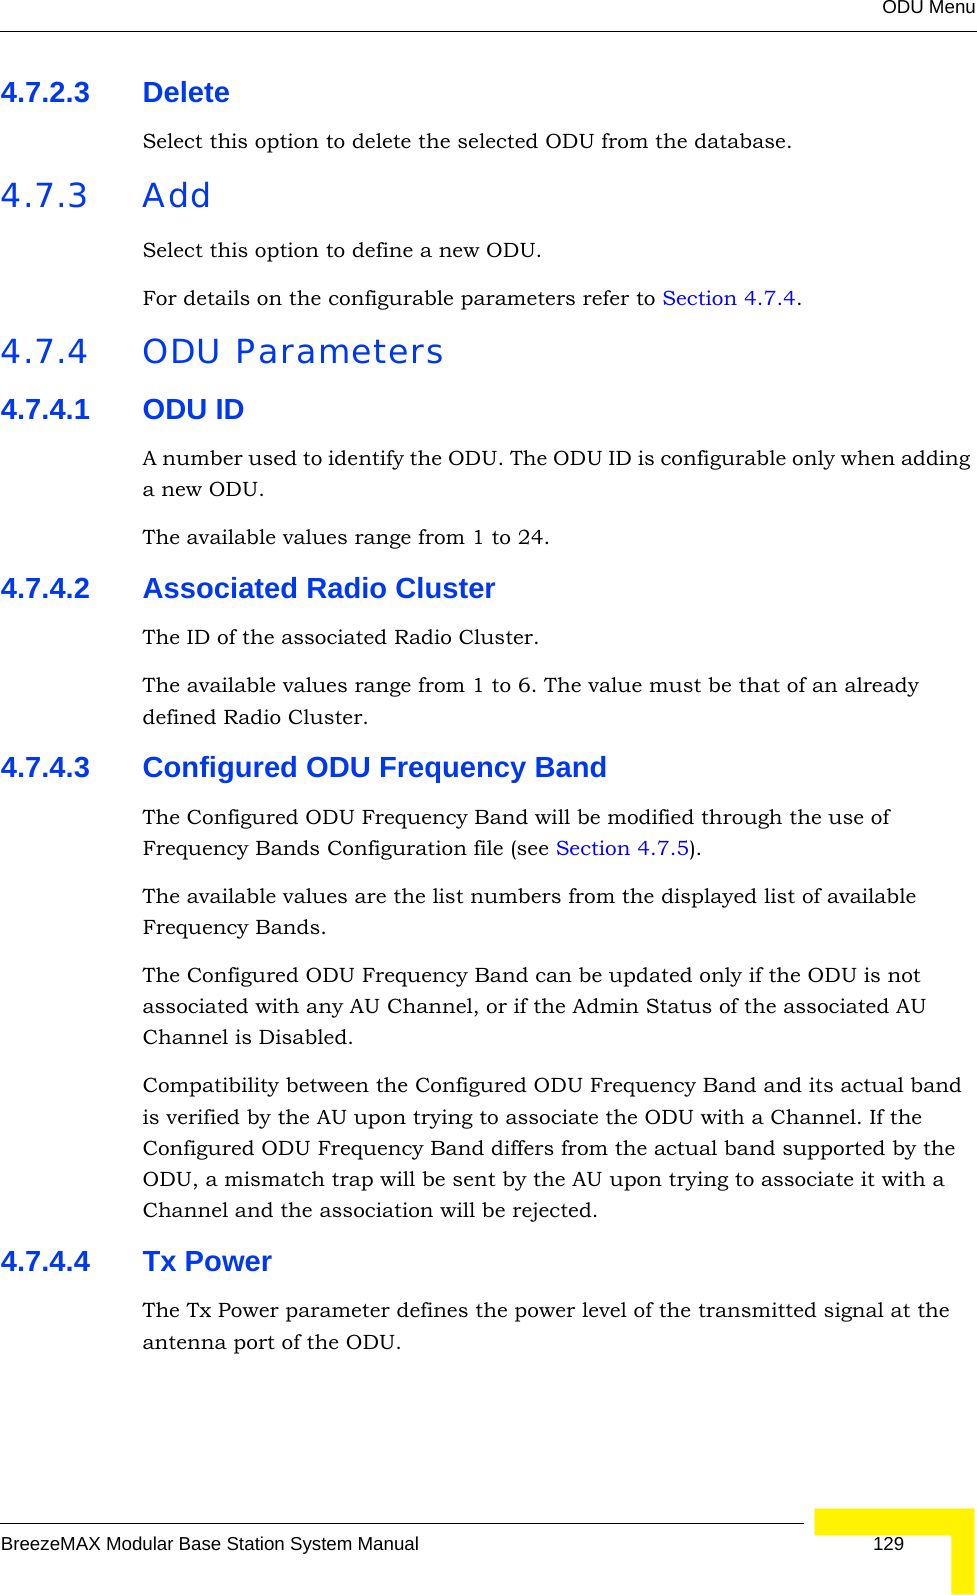 ODU MenuBreezeMAX Modular Base Station System Manual 1294.7.2.3 DeleteSelect this option to delete the selected ODU from the database.4.7.3 AddSelect this option to define a new ODU.For details on the configurable parameters refer to Section 4.7.4.4.7.4 ODU Parameters4.7.4.1 ODU IDA number used to identify the ODU. The ODU ID is configurable only when adding a new ODU.The available values range from 1 to 24.4.7.4.2 Associated Radio ClusterThe ID of the associated Radio Cluster.The available values range from 1 to 6. The value must be that of an already defined Radio Cluster.4.7.4.3 Configured ODU Frequency BandThe Configured ODU Frequency Band will be modified through the use of Frequency Bands Configuration file (see Section 4.7.5). The available values are the list numbers from the displayed list of available Frequency Bands.The Configured ODU Frequency Band can be updated only if the ODU is not associated with any AU Channel, or if the Admin Status of the associated AU Channel is Disabled.Compatibility between the Configured ODU Frequency Band and its actual band is verified by the AU upon trying to associate the ODU with a Channel. If the Configured ODU Frequency Band differs from the actual band supported by the ODU, a mismatch trap will be sent by the AU upon trying to associate it with a Channel and the association will be rejected.4.7.4.4 Tx PowerThe Tx Power parameter defines the power level of the transmitted signal at the antenna port of the ODU.